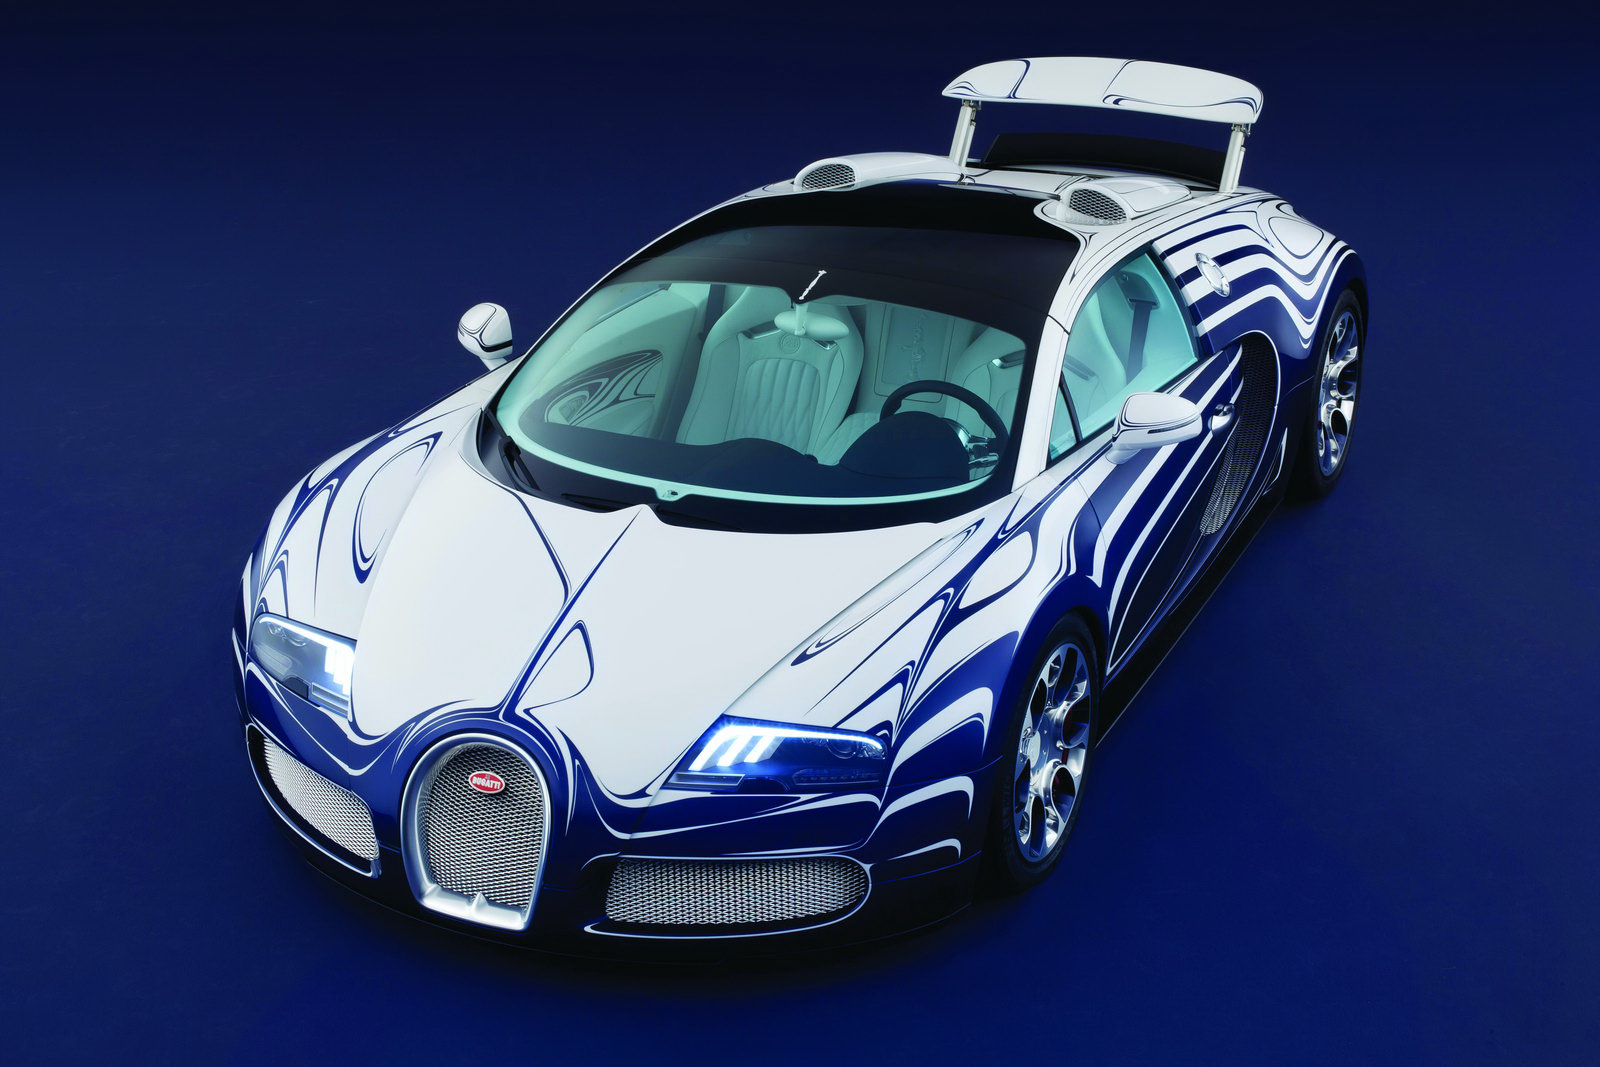 One-off Bugatti Veyron L'Or Blanc Is Pimped Out With... Porcelain